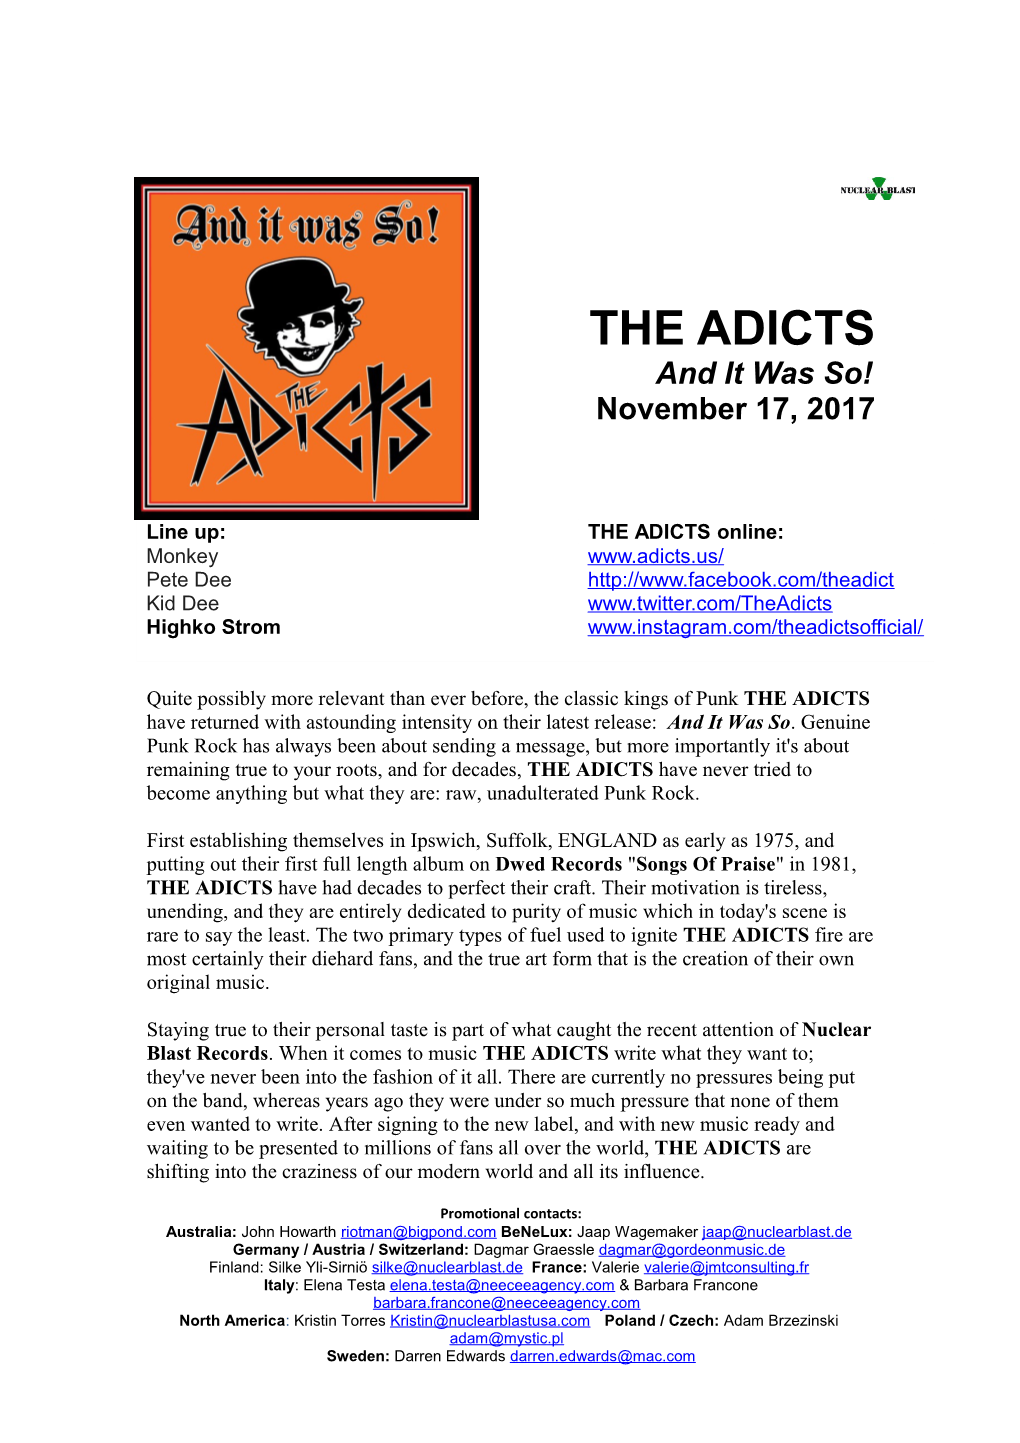 Quite Possibly More Relevant Than Ever Before, the Classic Kings of Punk the ADICTS Have